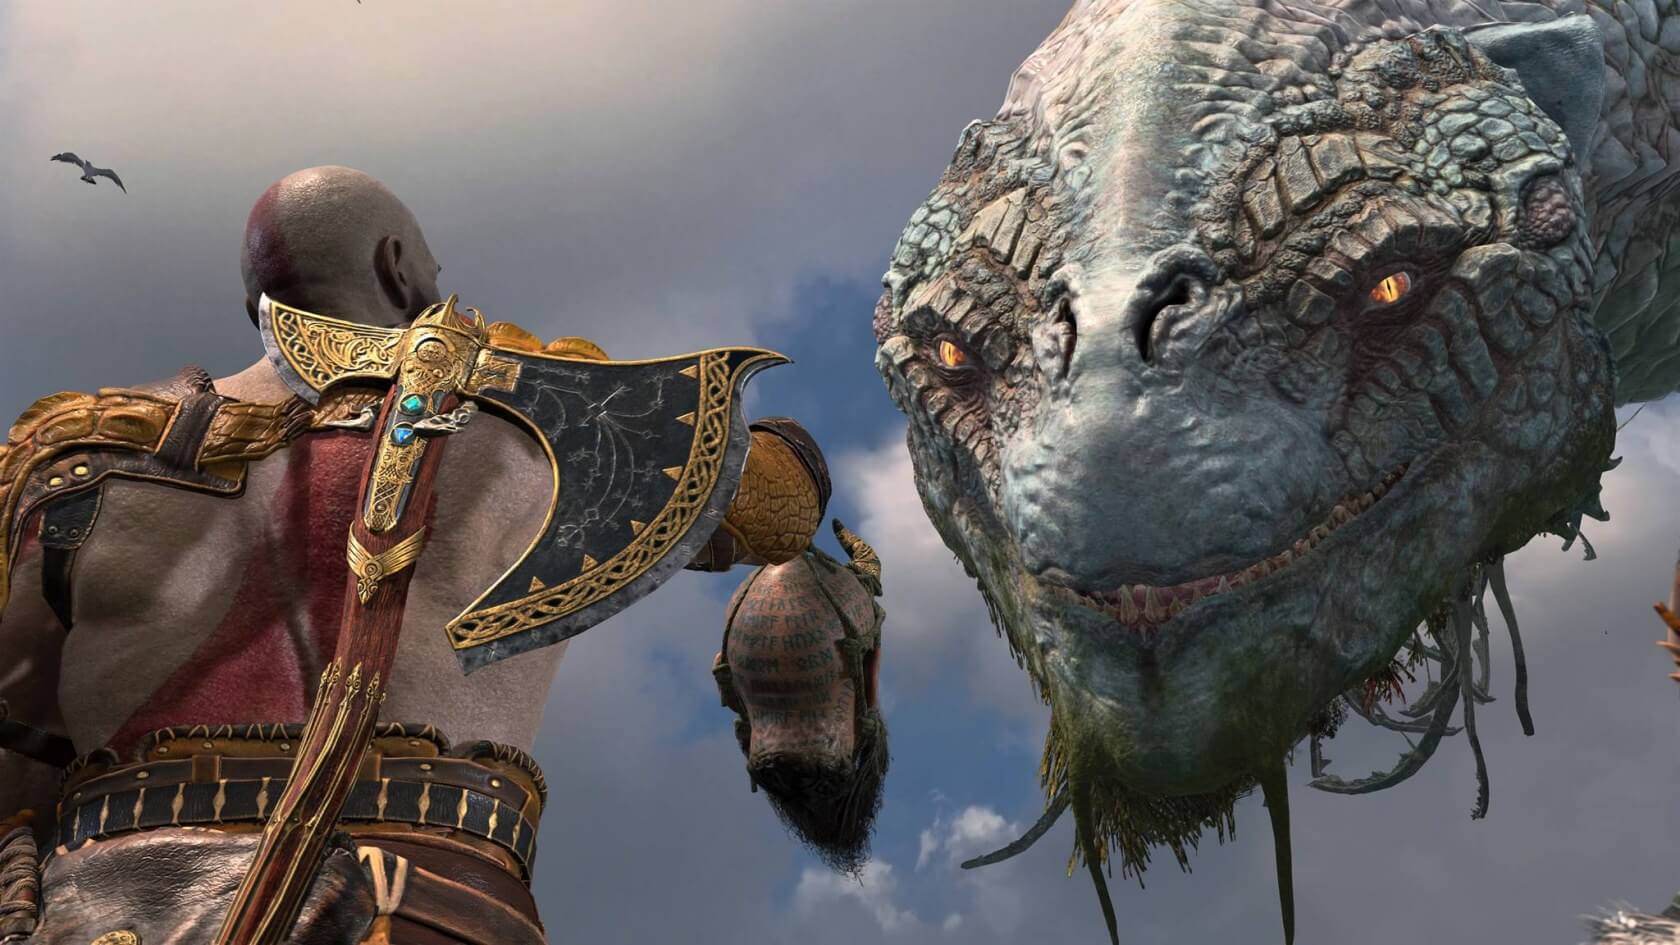 God of War adds a photo mode that is almost as fun as the game